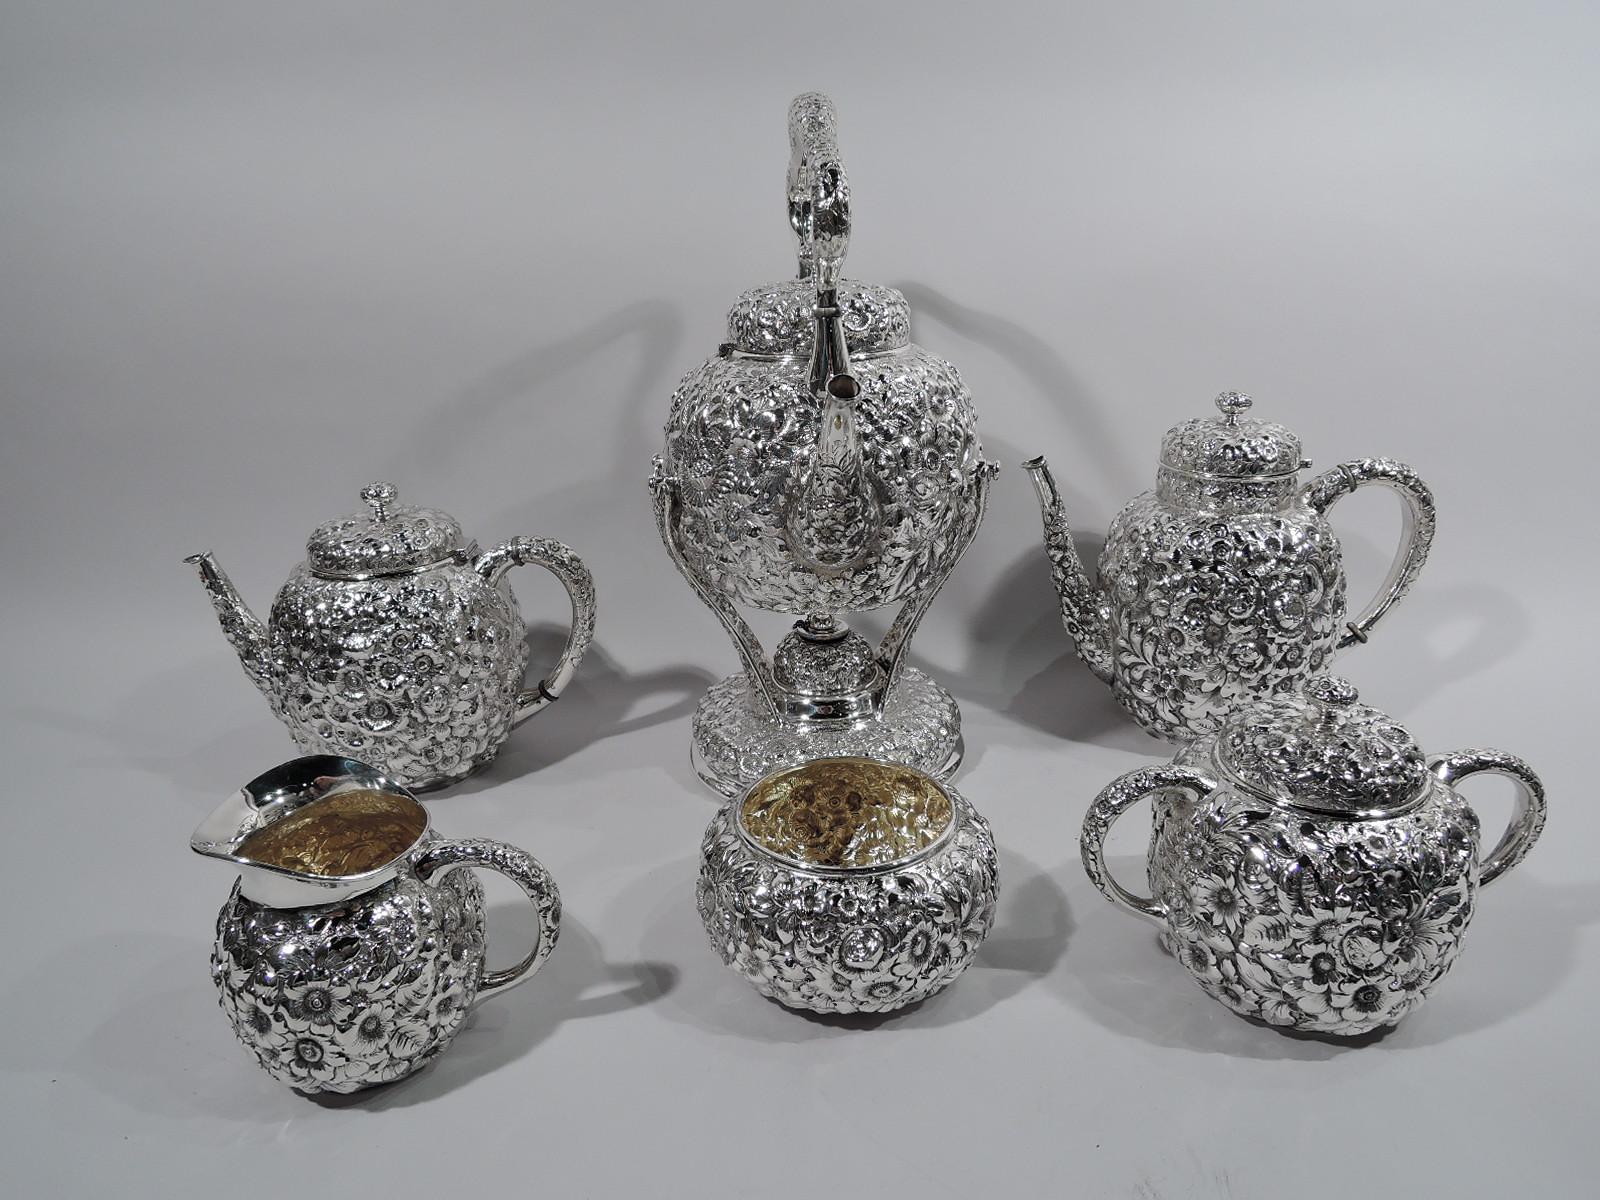 Turn of the century sterling silver tea set. Made by Shiebler in New York. This set comprises 6 pieces: Hot water kettle on stand, coffeepot, teapot, creamer, sugar, and waste bowl.

Globular and oval bodies. Covers domed (kettle and pot covers